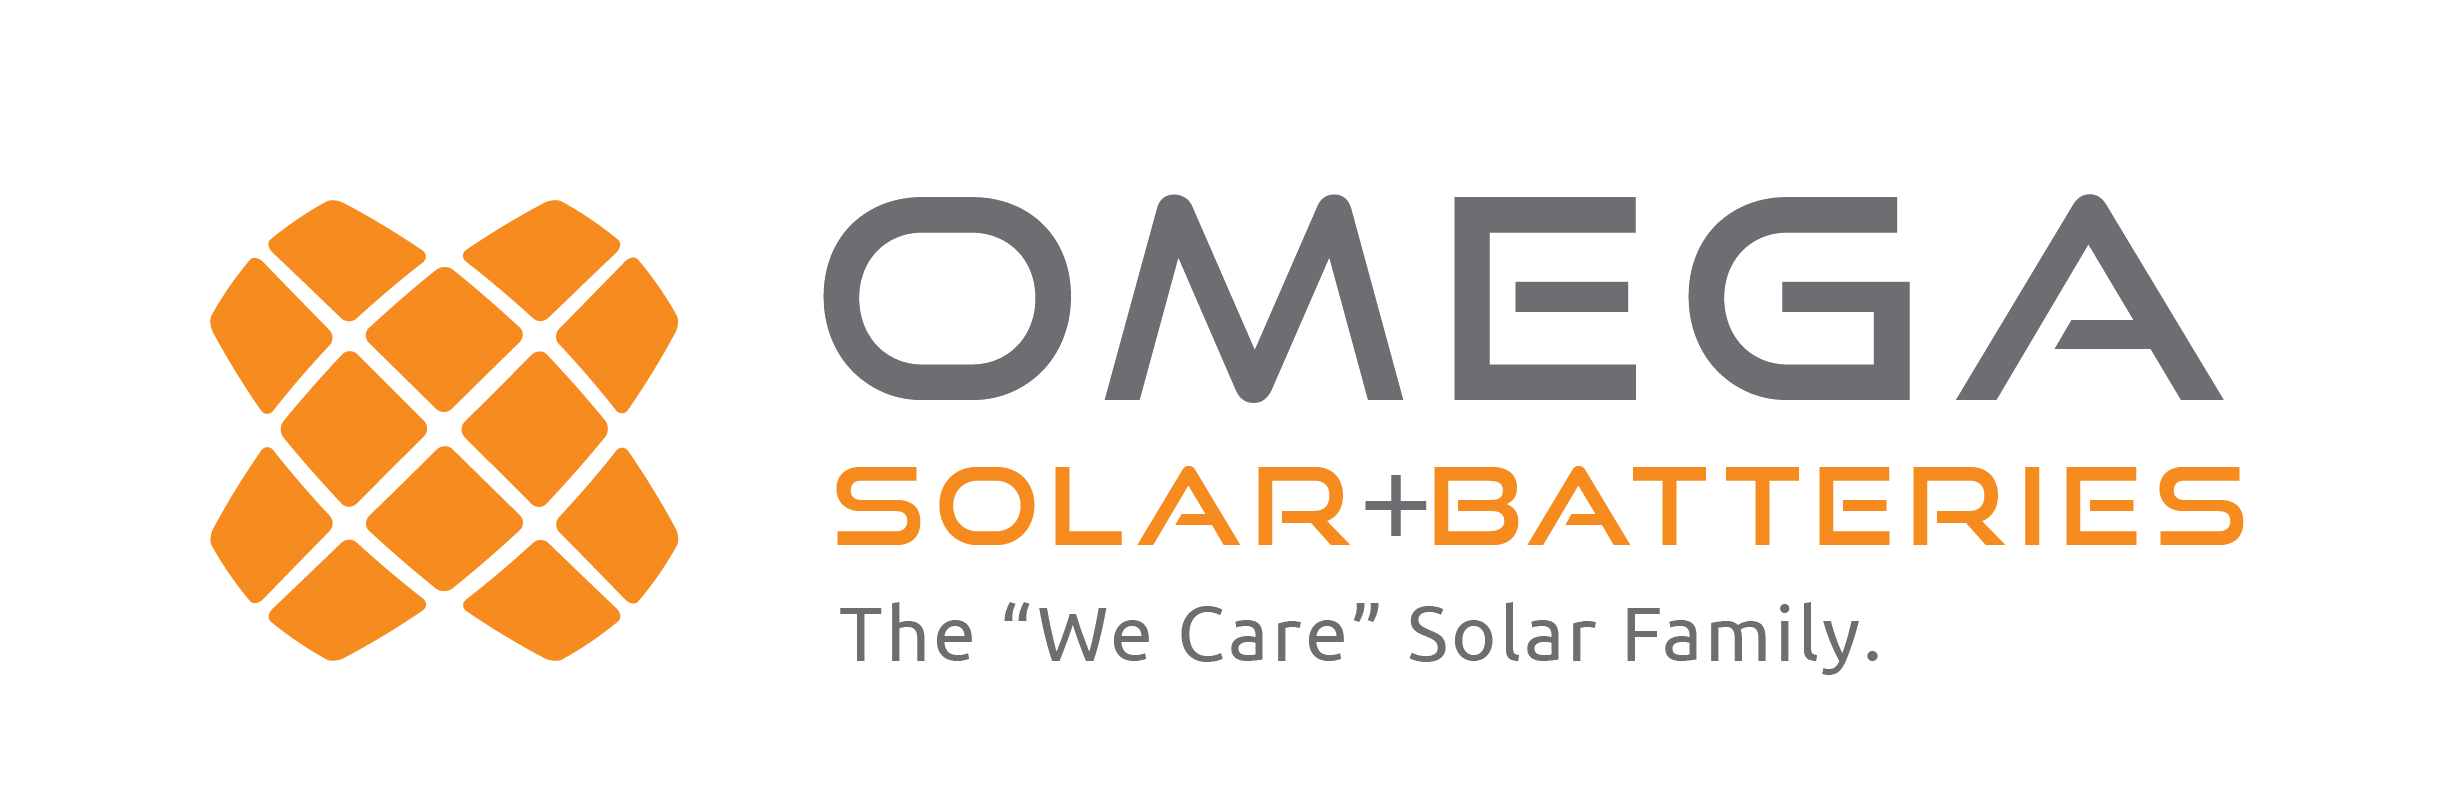 omega solar and batteries